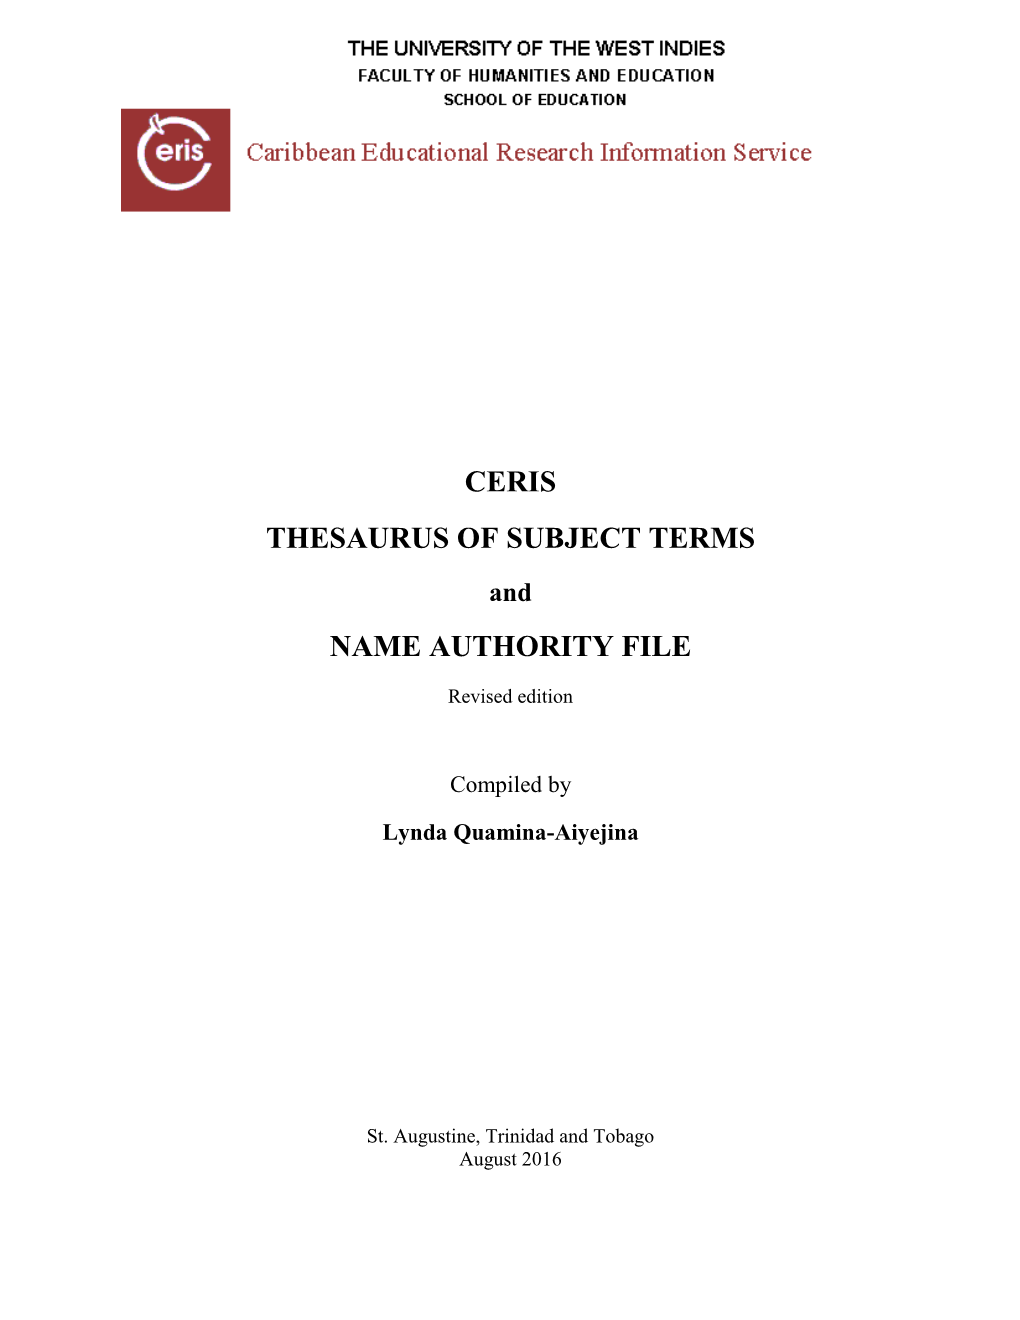 Ceris Thesaurus of Subject Terms Name Authority File